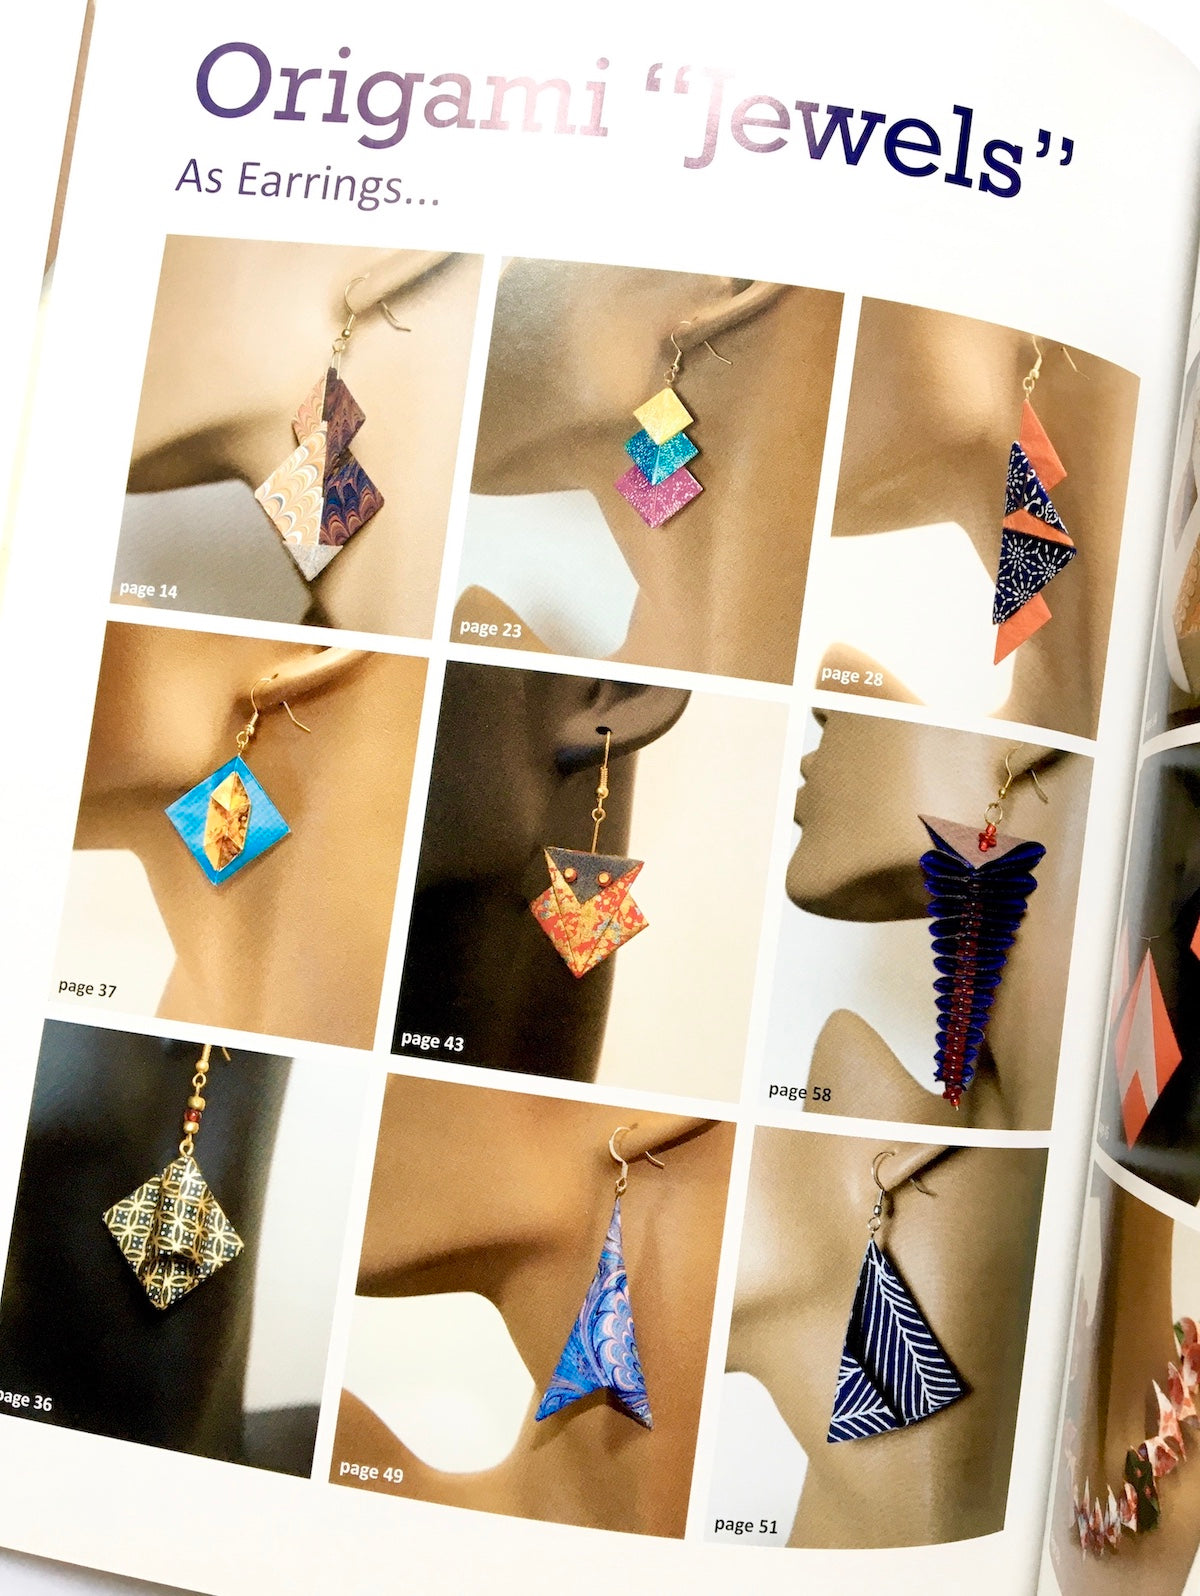 LaFosse & Alexander's Origami Jewelry: Easy-to-Make Paper Pendants, Bracelets, Necklaces and Earrings: Origami Book with Instructional DVD: Great for Kids and Adults!